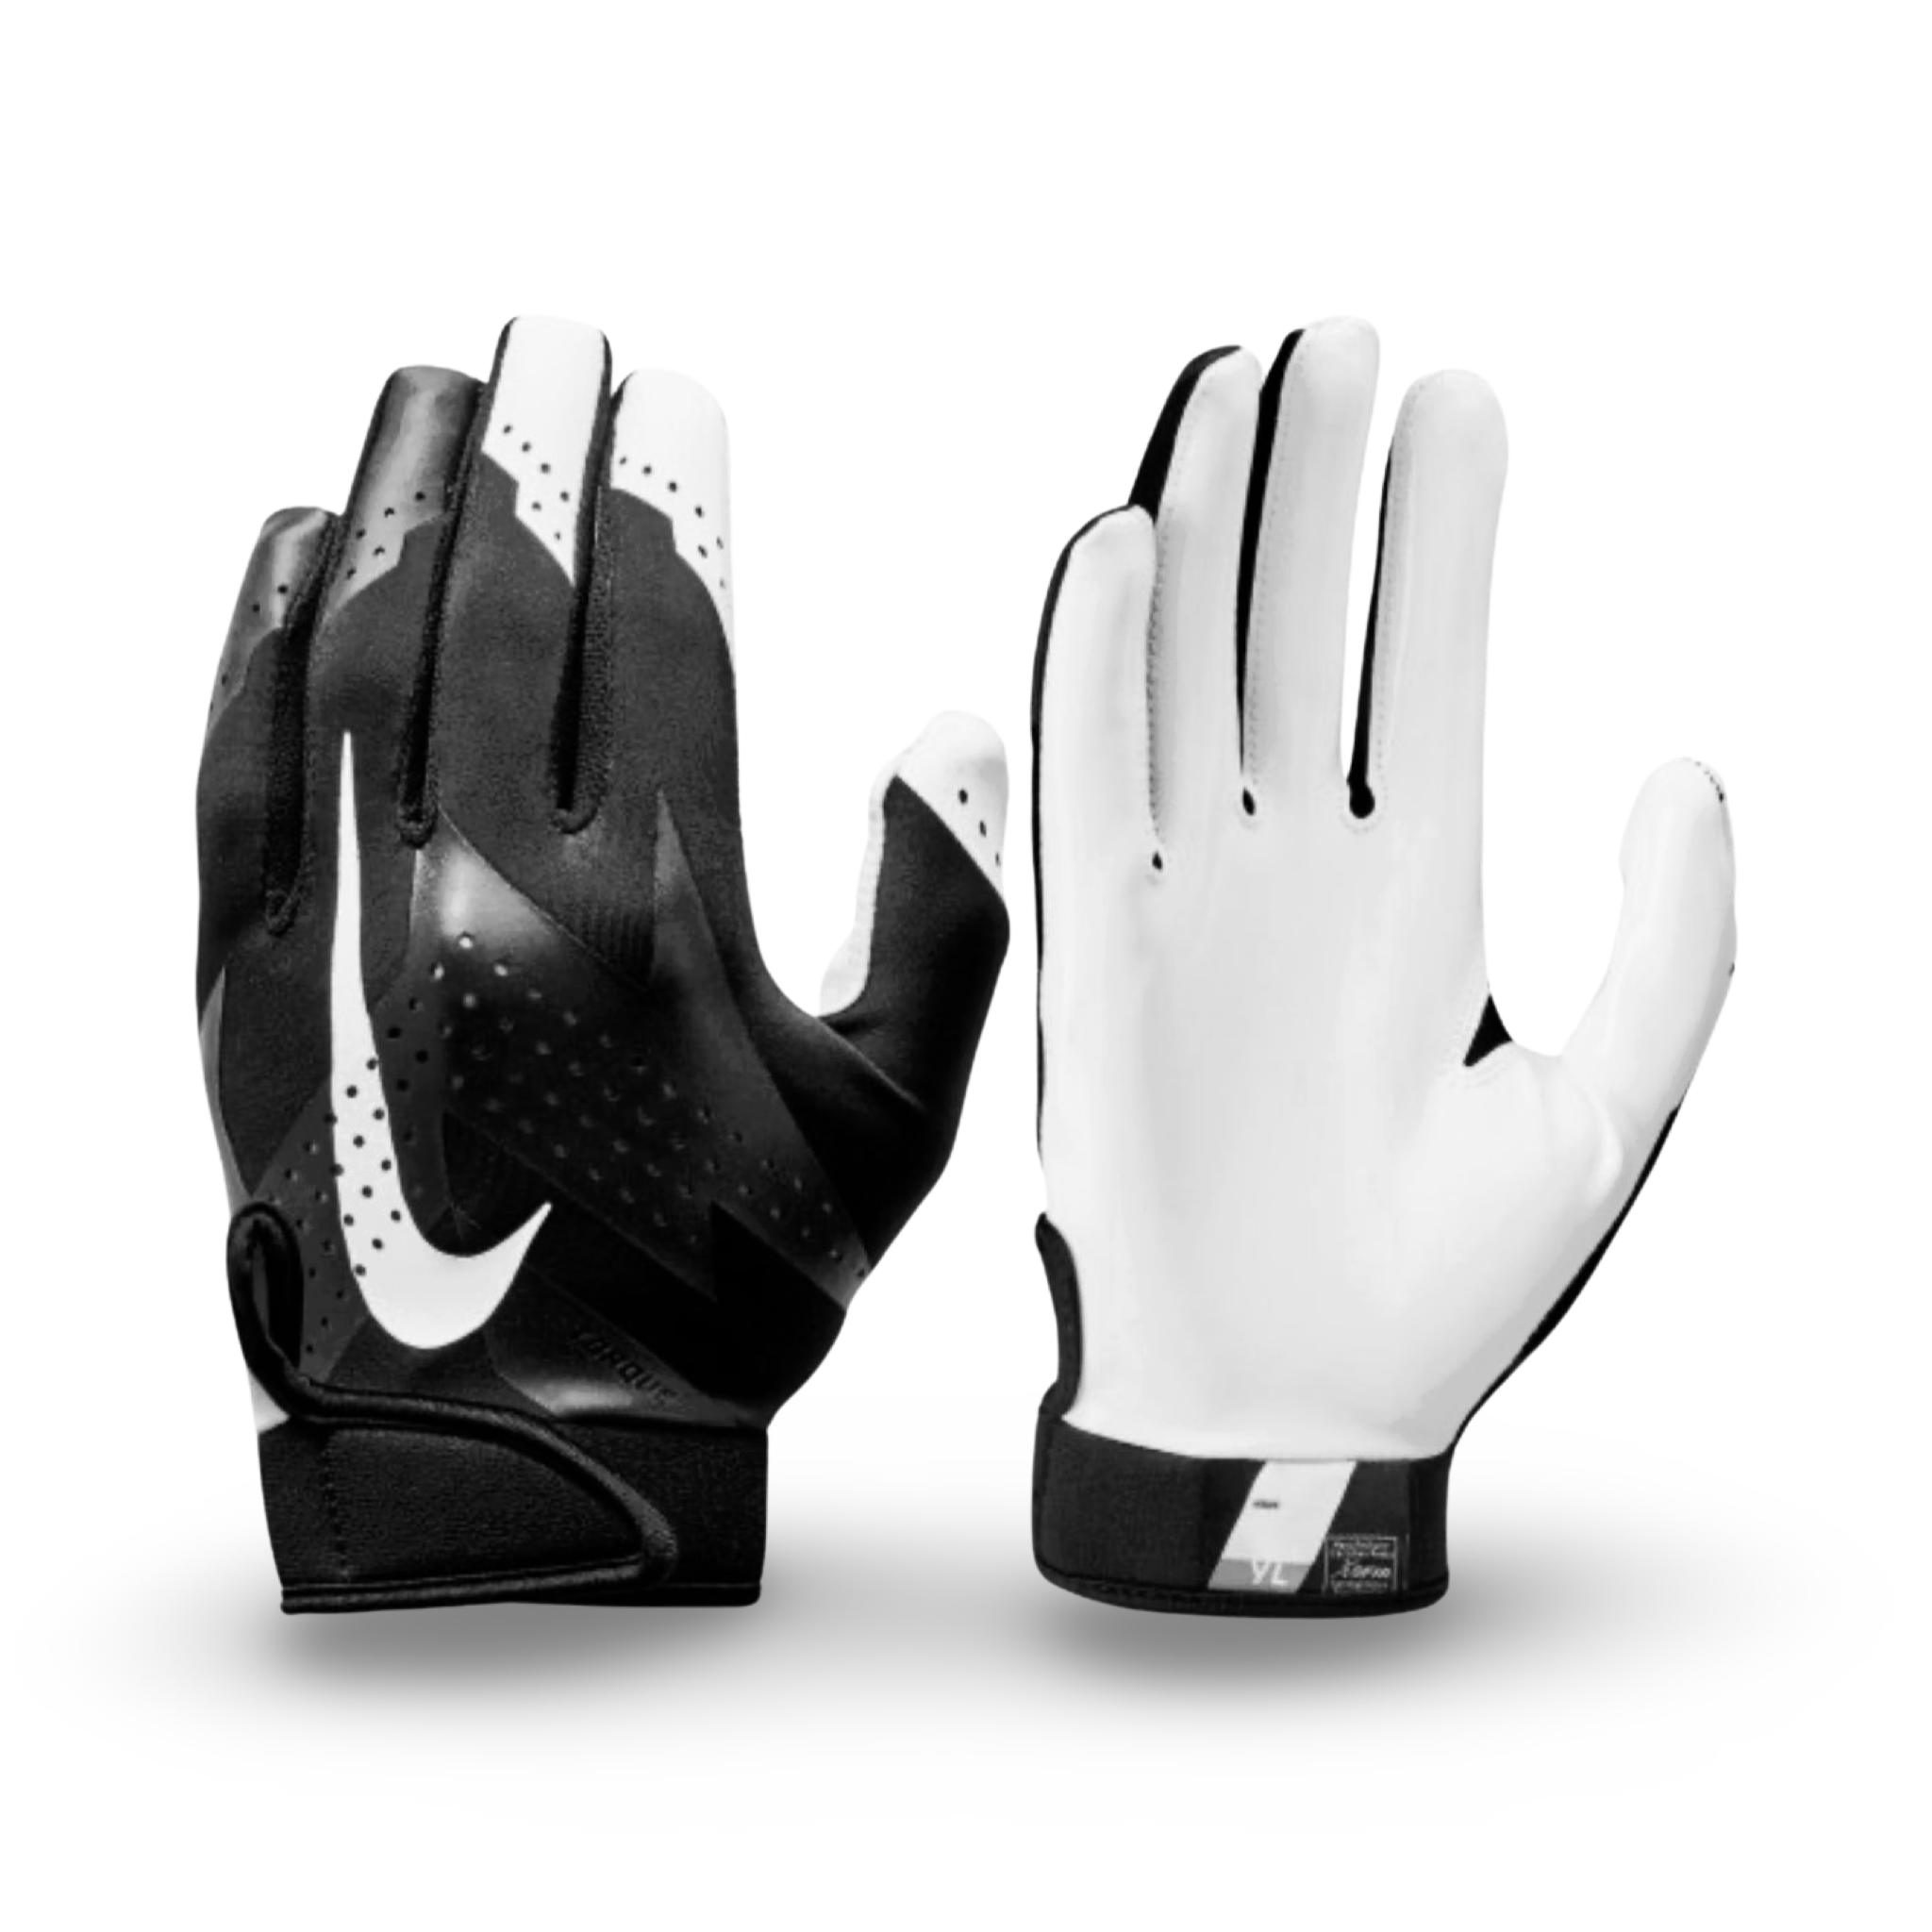 Nike Torque 2.0 Football Gloves - Youth